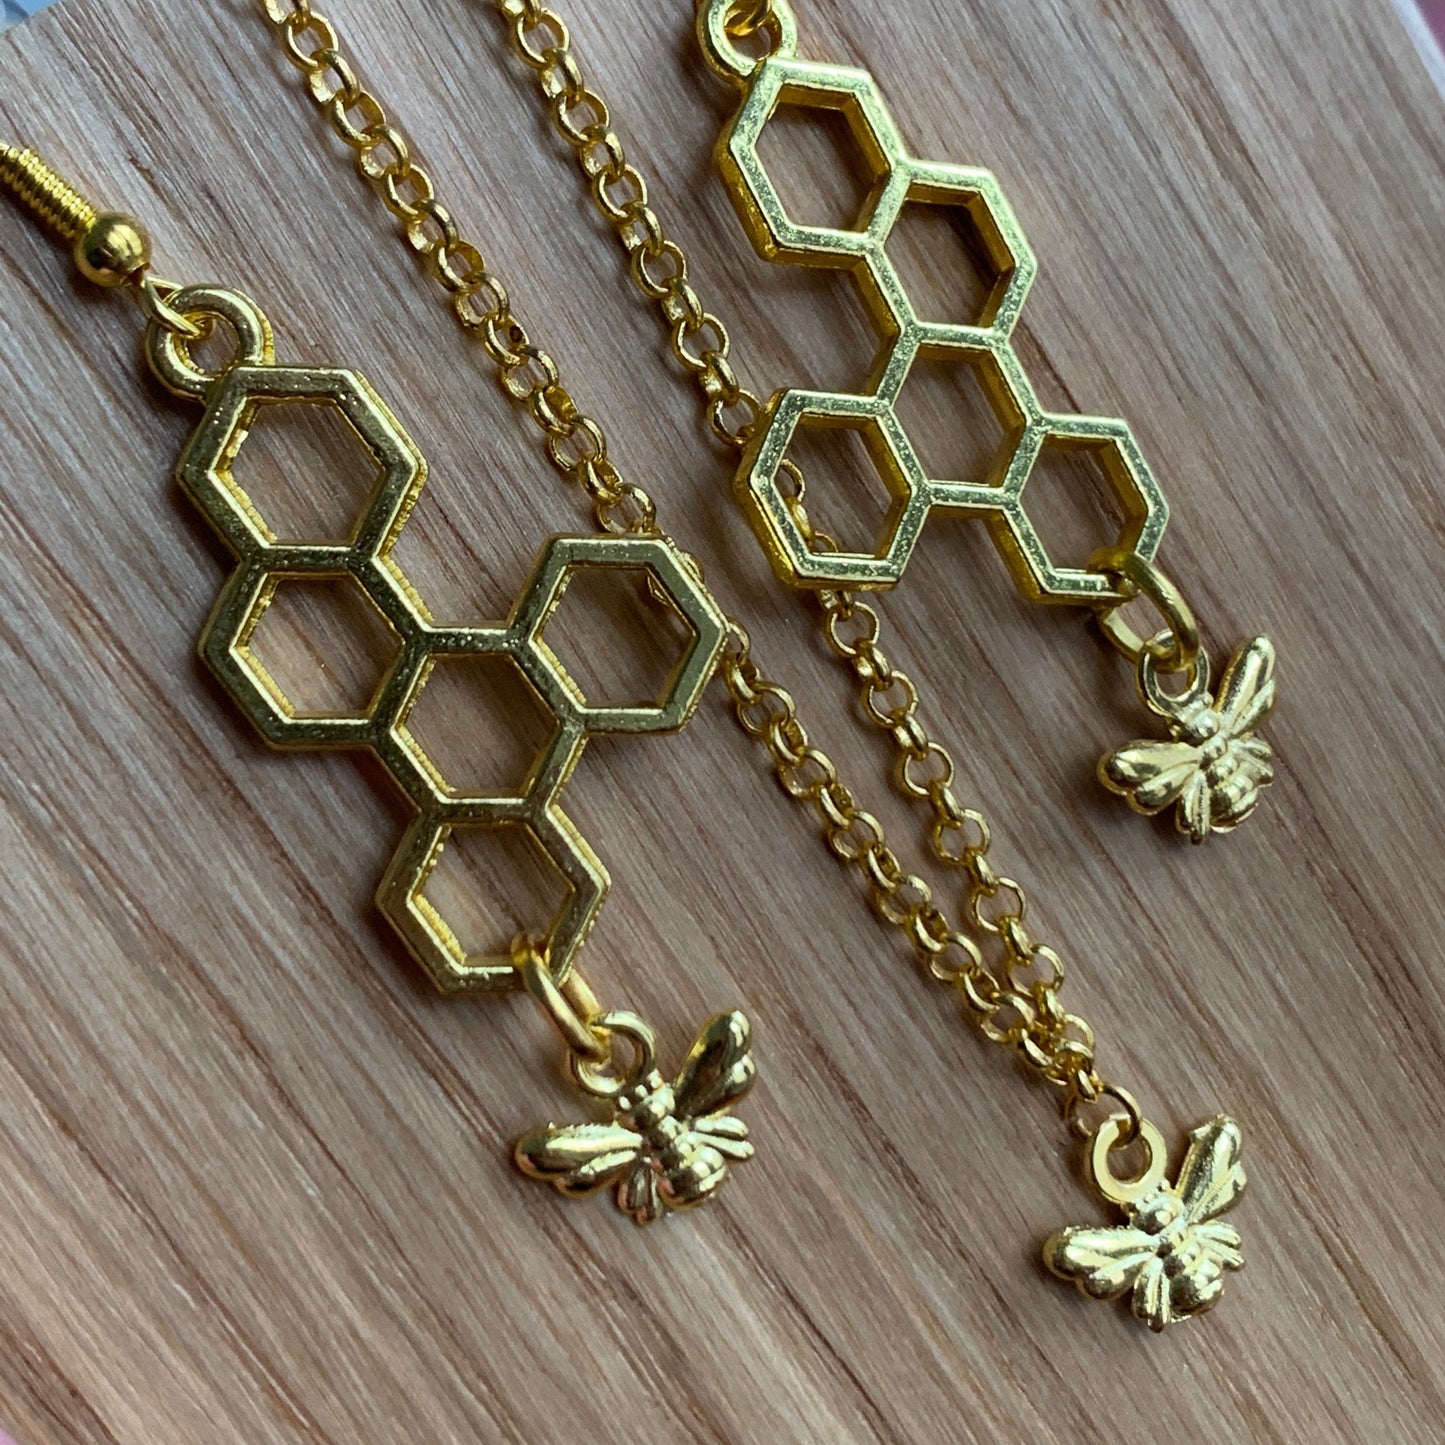 Gold Honeycomb and Bee Dangle Drop Earrings - Lxyclr Authentic